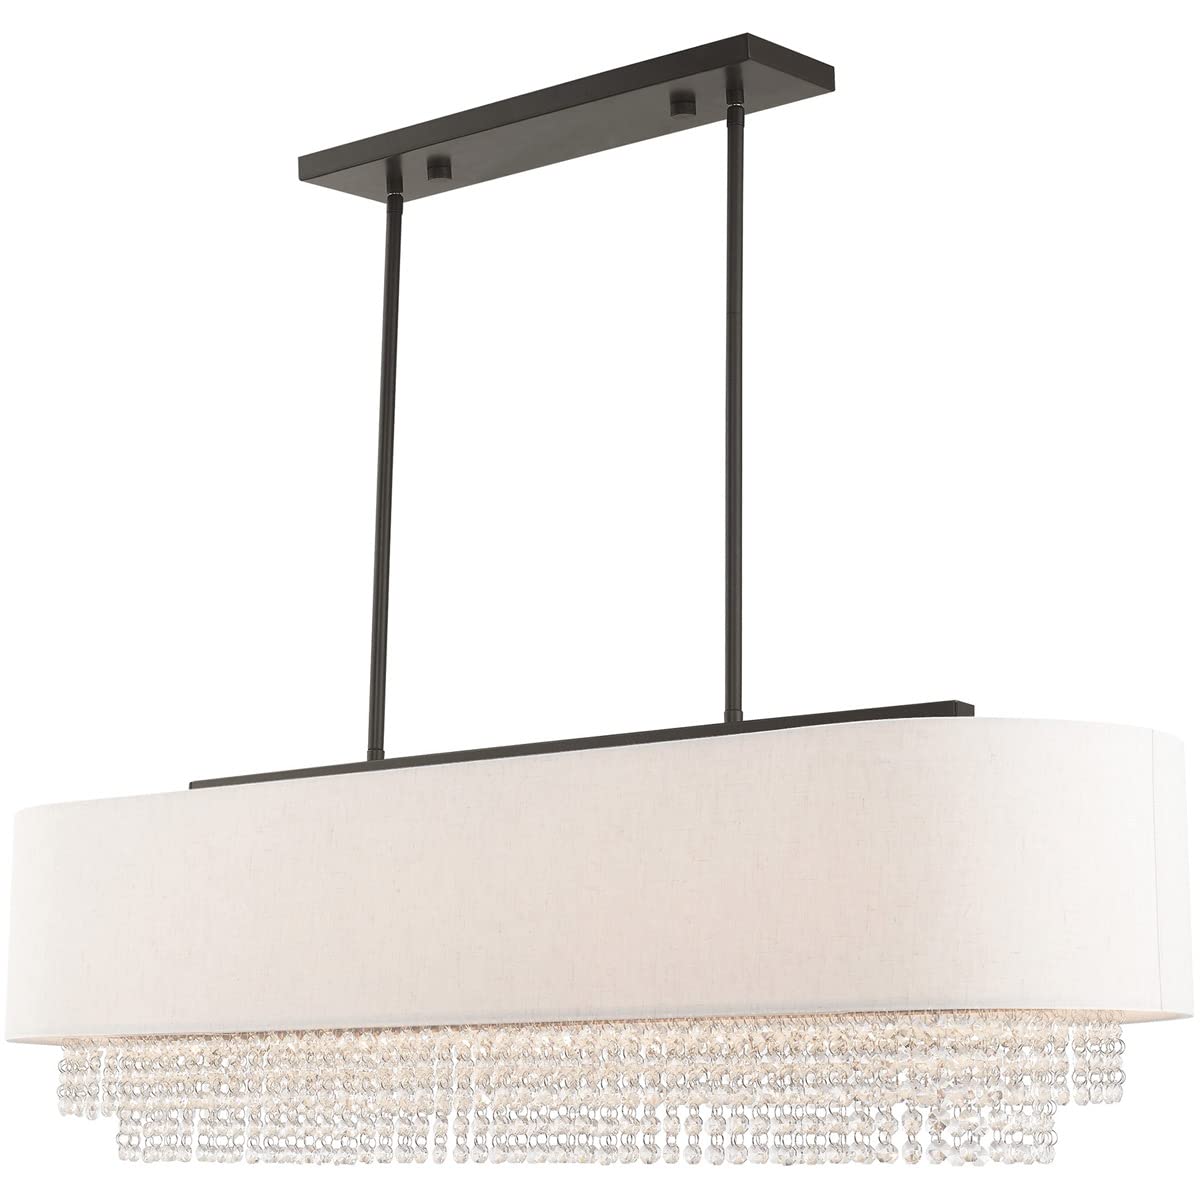 Livex Lighting 51125-92 Carlisle - 41" Five Light Linear Chandelier, English Bronze Finish with Oatmeal Fabric Shade with Clear Crystal